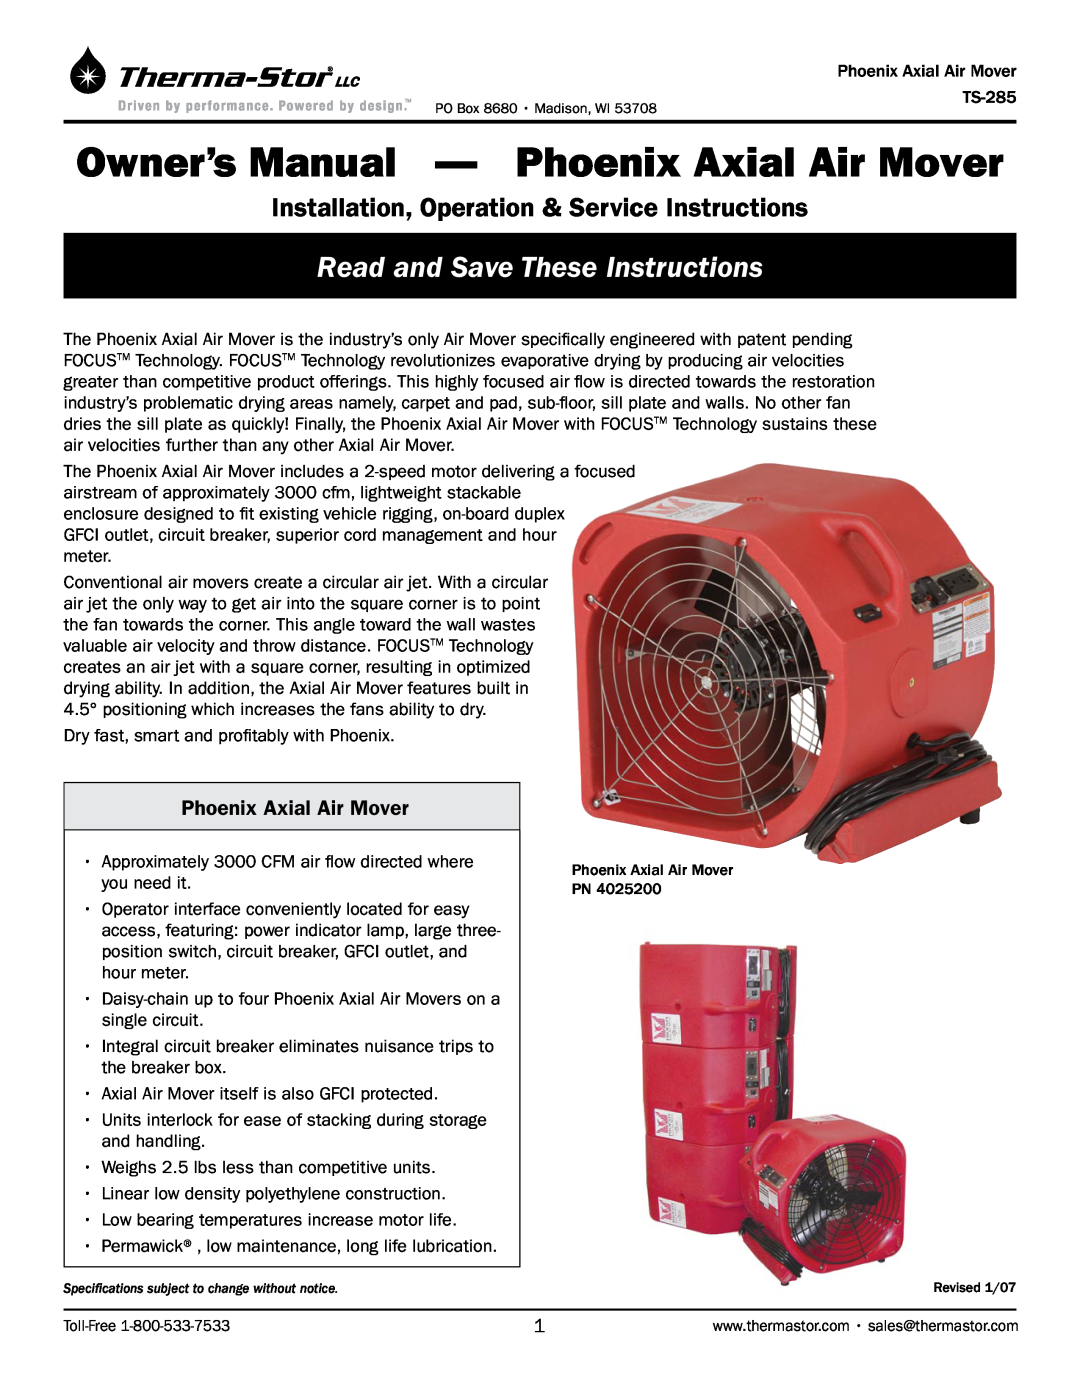 Therma-Stor Products Group TS-285 owner manual Phoenix Axial Air Mover, Read and Save These Instructions 